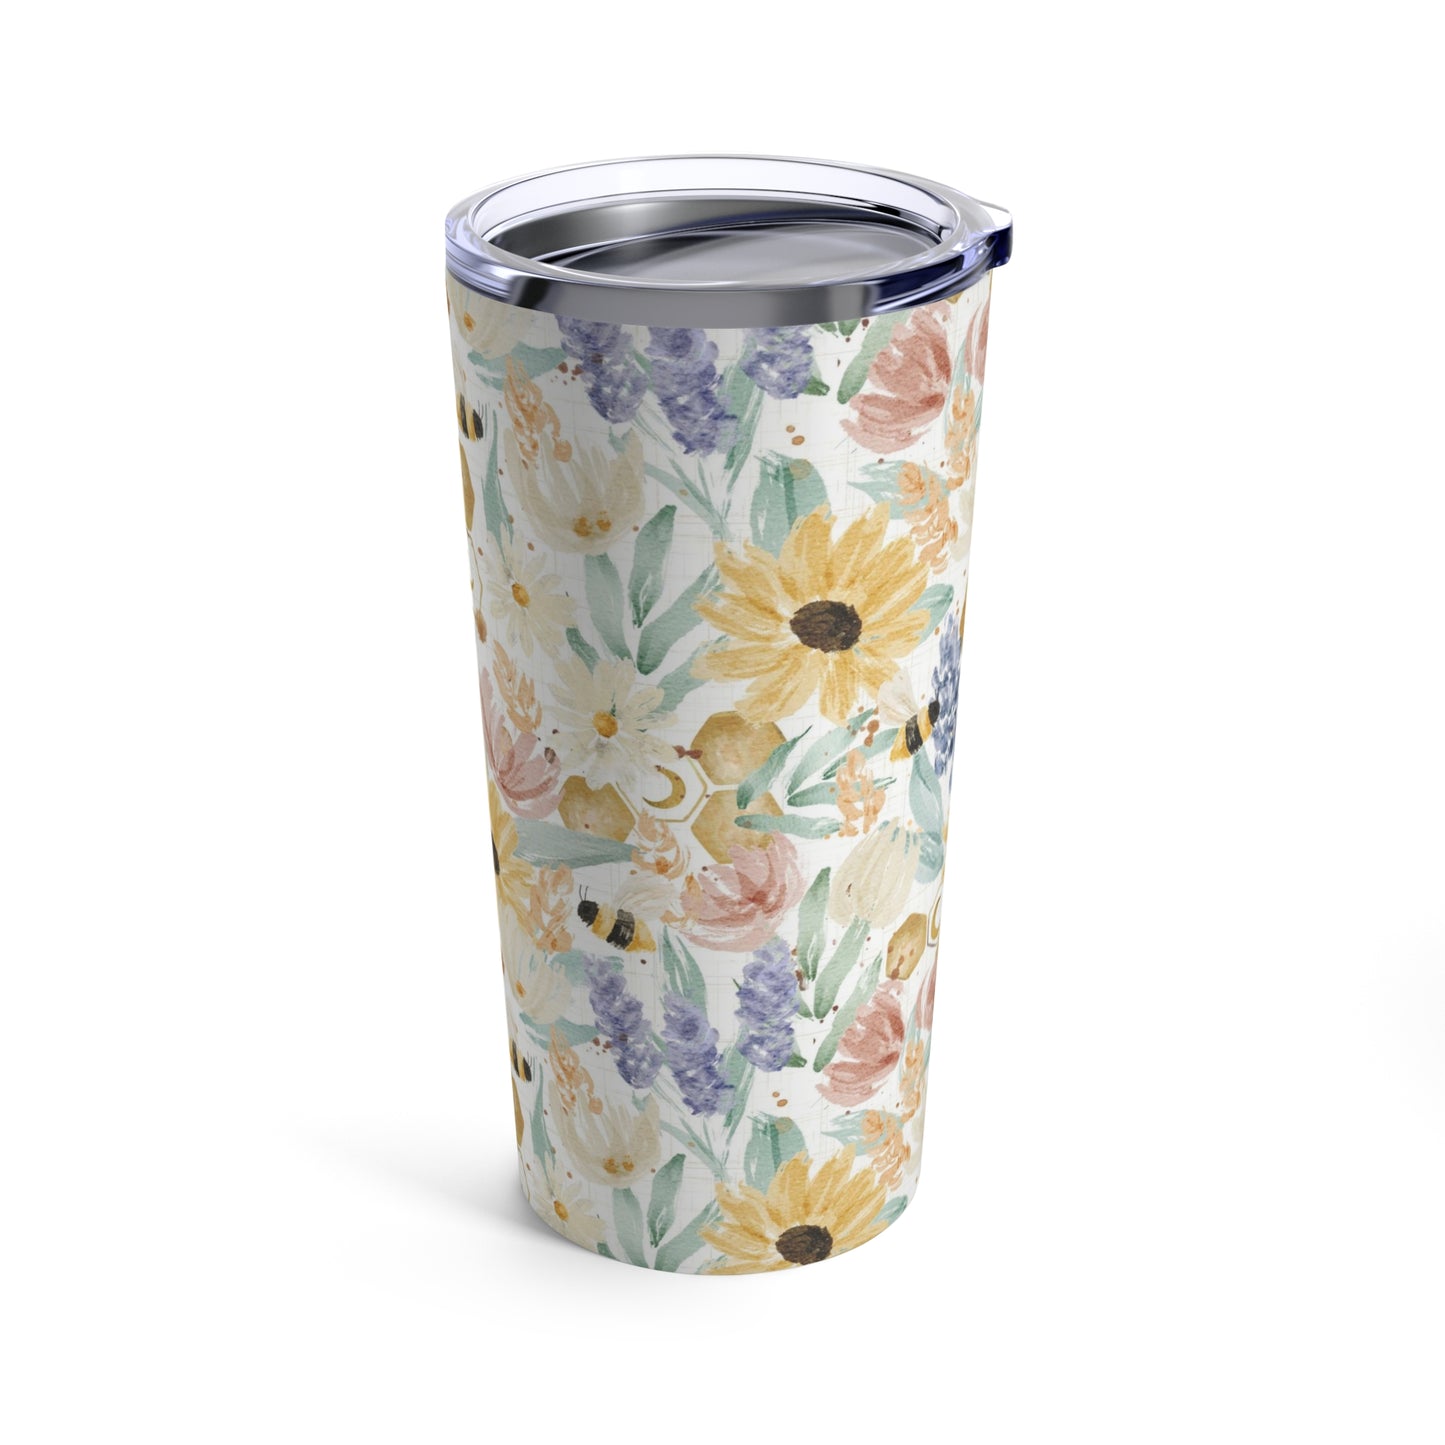 Wildflowers and bees Tumbler 20oz for gardener or wildflowers lover. Stainless travel tumbe el vacuum insulated for her.